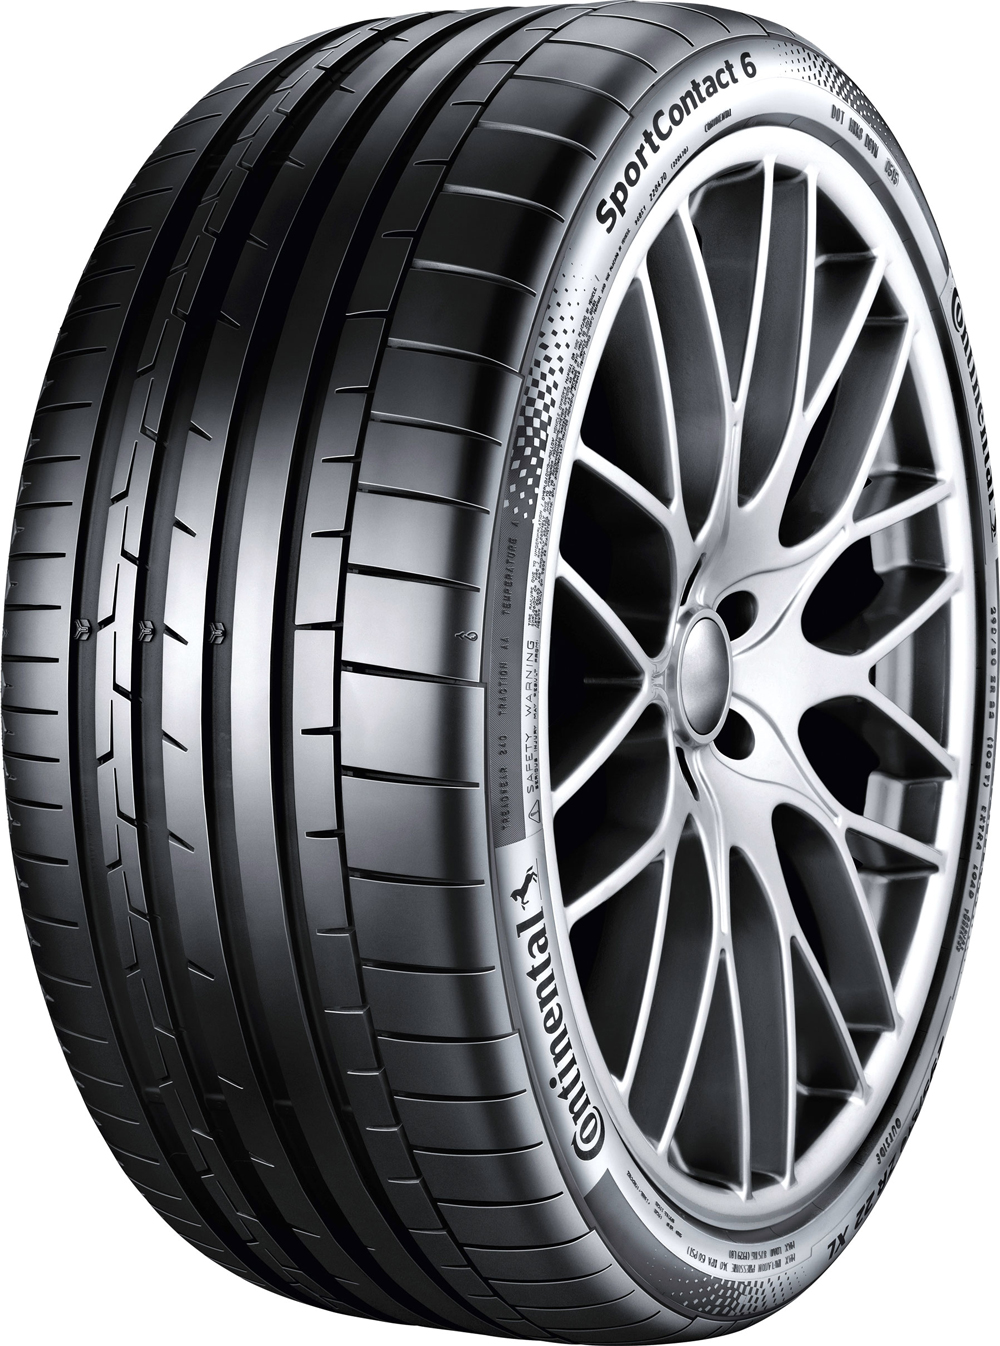 Anvelope auto CONTINENTAL Sport Contact 6 ContiSilent XL AUDI FP 285/40 R22 110